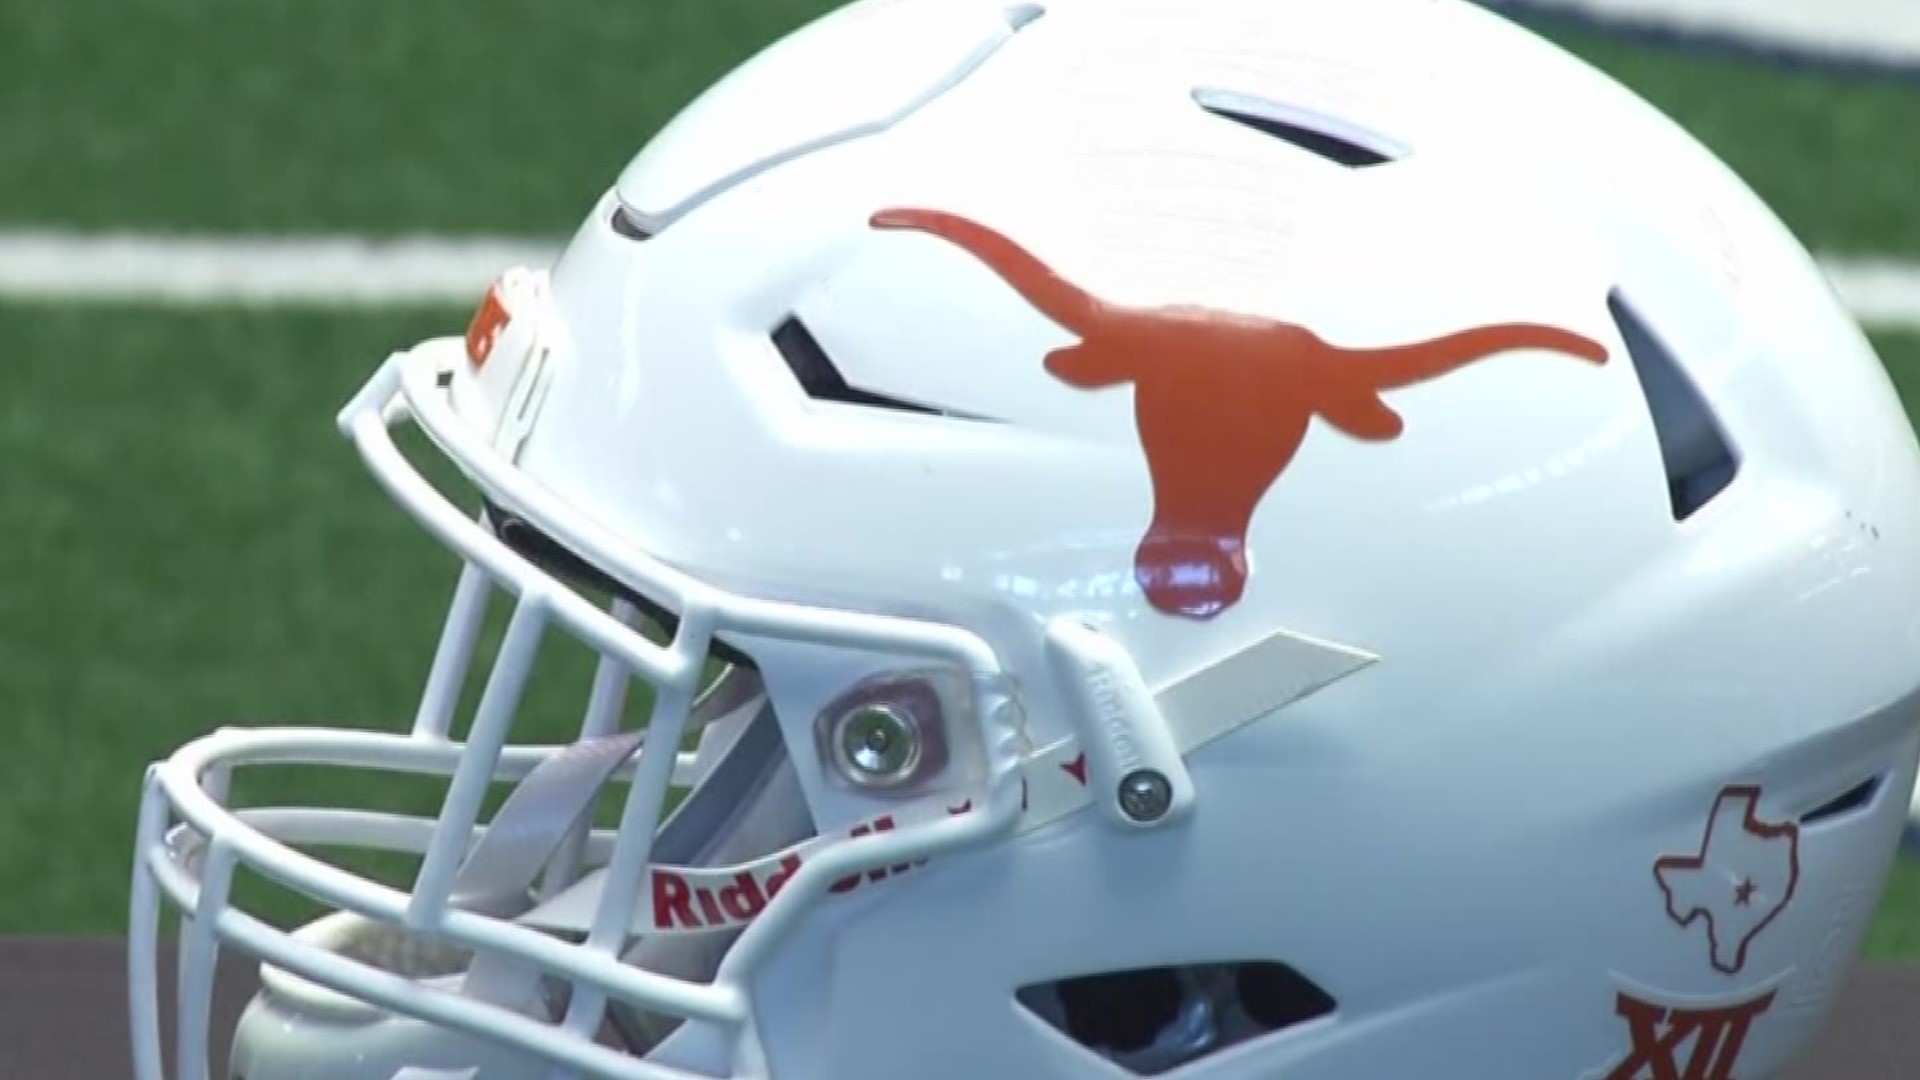 Texas is hoping to take another giant leap after winning 10 games a year ago.